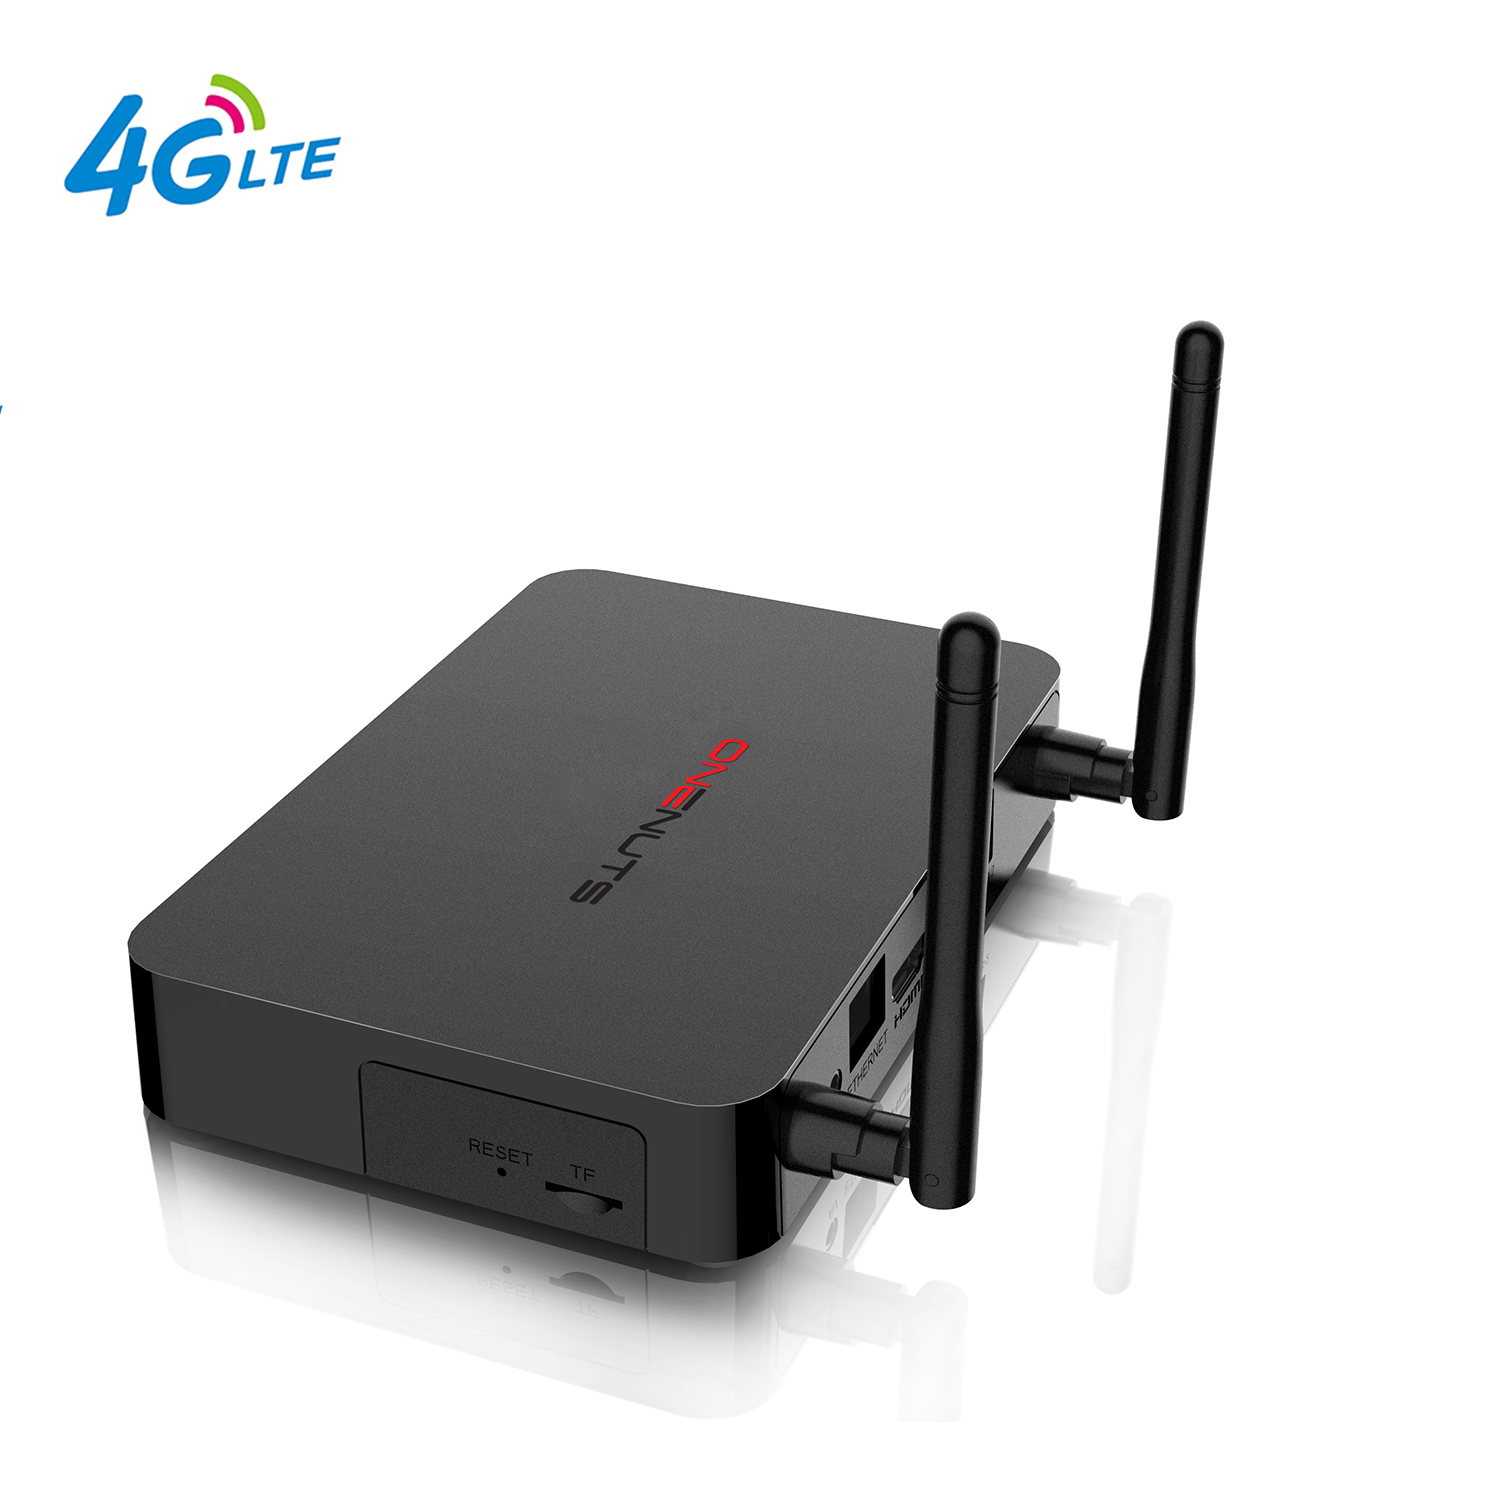 Android TV Box Huawei WCDMA Modem intégré, Android TV Box WCDMA 4G/3G Dongle